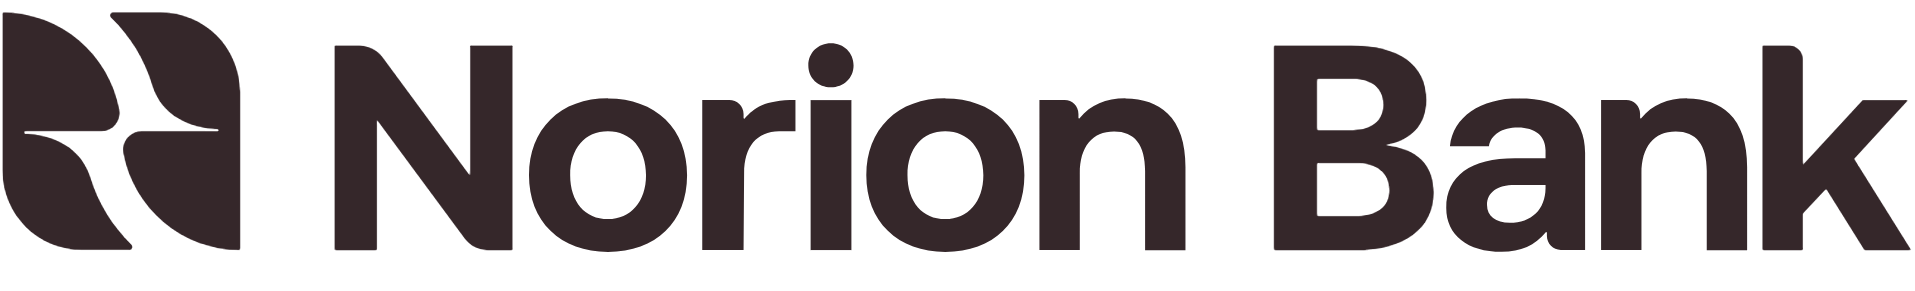 Company logo for Norion Bank